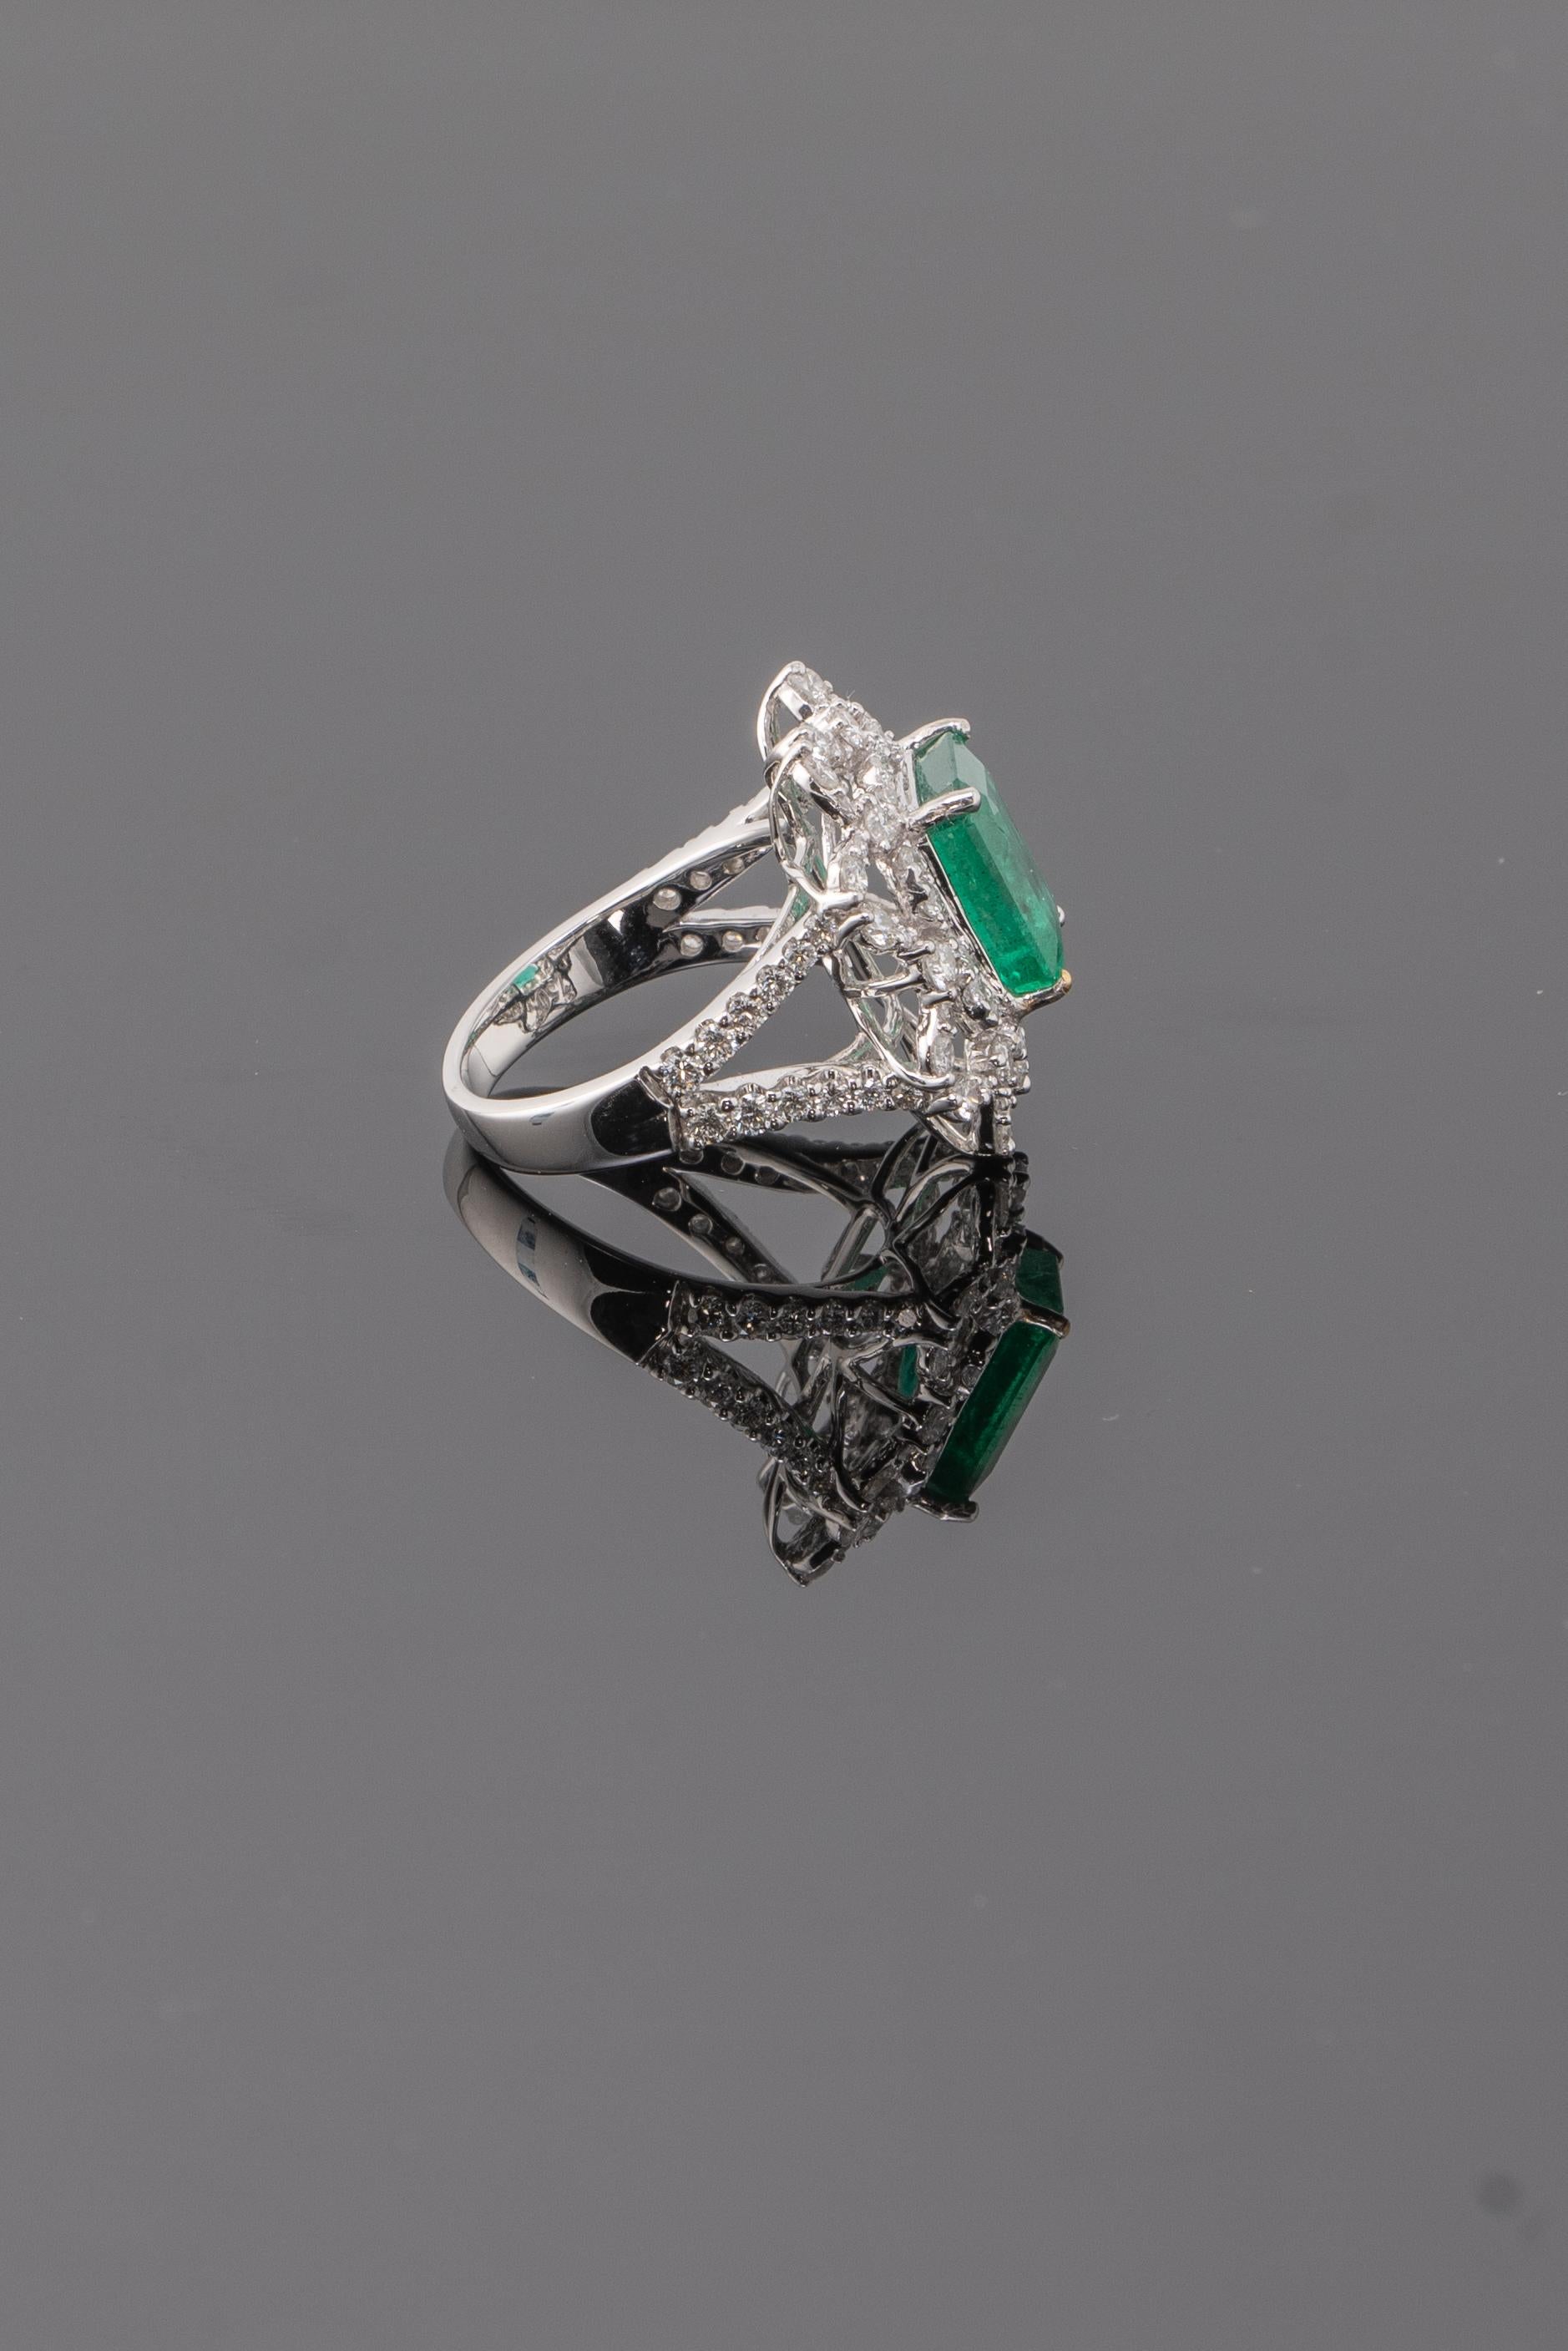 Make a statement with this beautiful, natural 4.05 carat Zambian Emerald and 1.78 carat White Diamond Cocktail Ring. The center stone is transparent with very few naturally occuring inclusions, and great lustre. 
Currently sized at US 6, can be